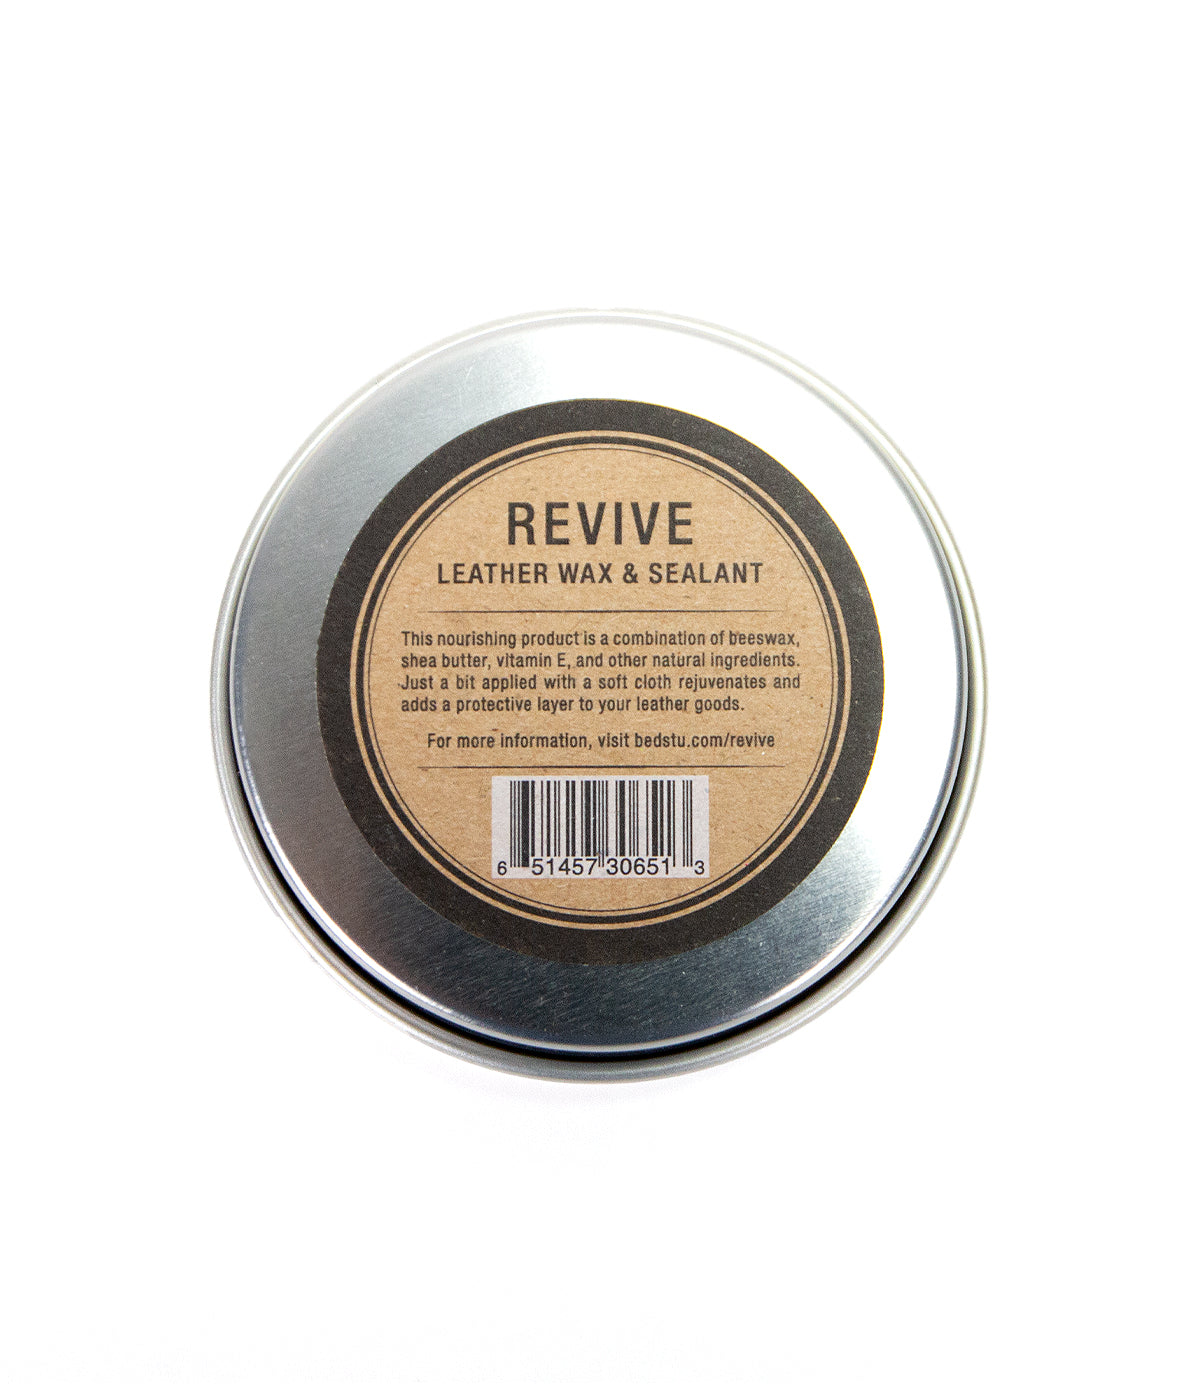 A tin of Bed Stu's Revive Leather Wax & Protective Barrier Sealant for leather products on a white background.